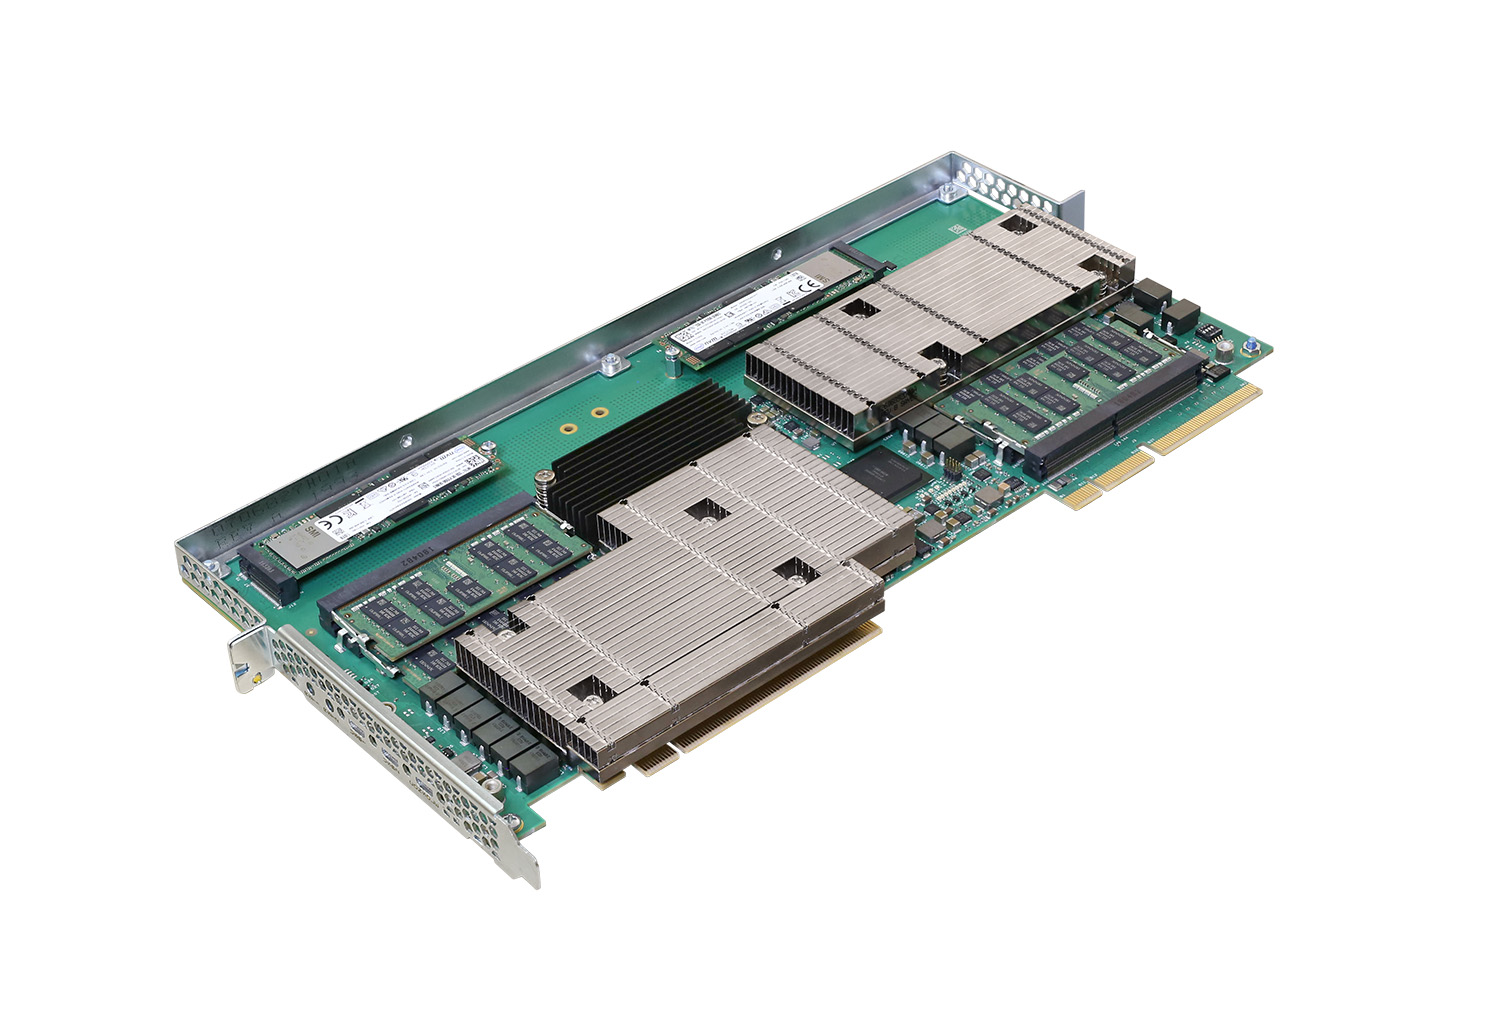 PCIe Card Enables Cloud Gaming-as-a-Service